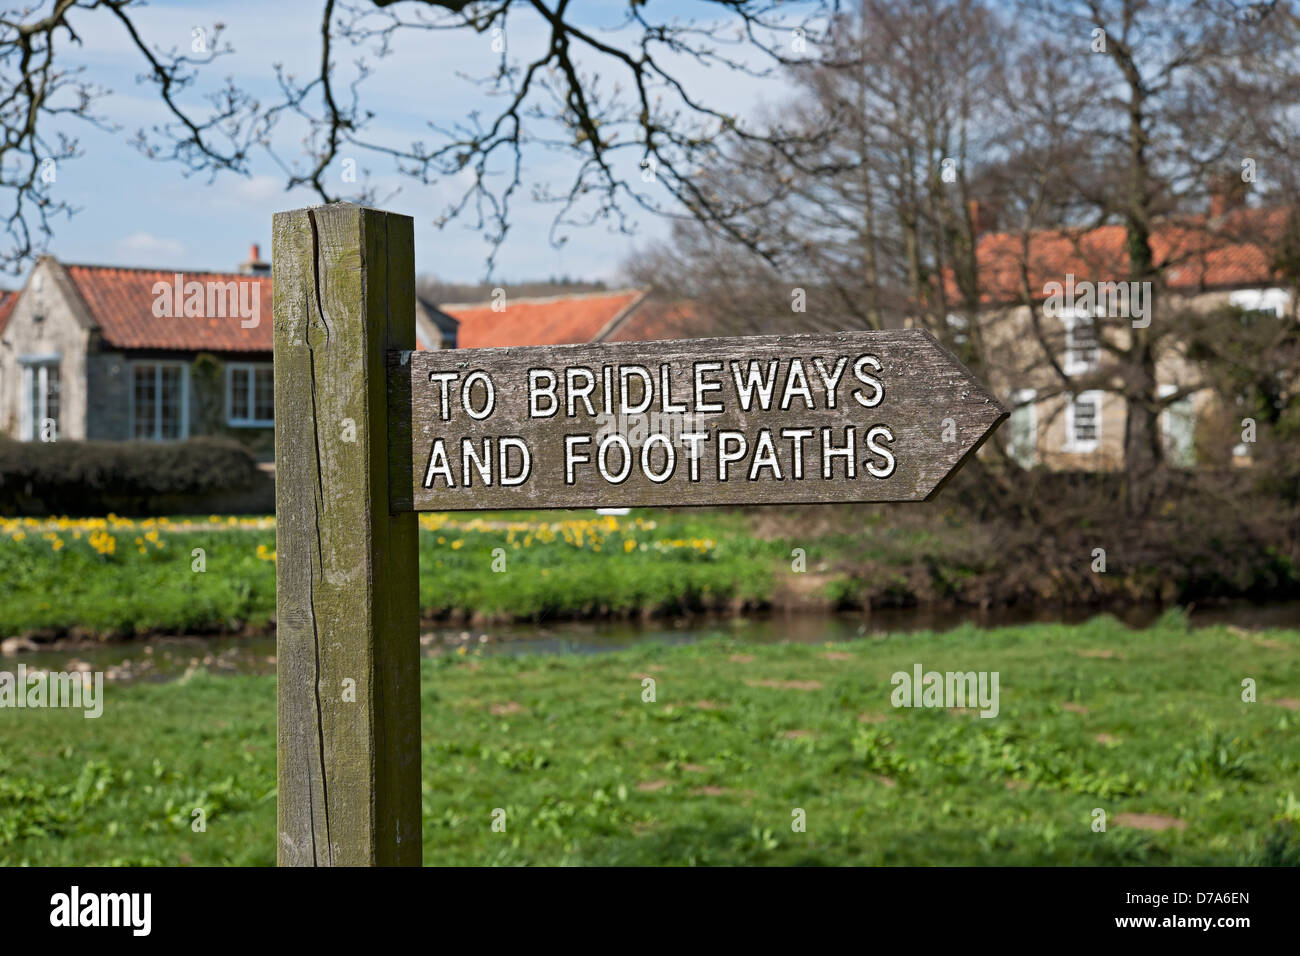 Close up of wooden signpost sign pointing to bridleways and footpaths footpath Sinnington North Yorkshire England UK United Kingdom GB Great Britain Stock Photo